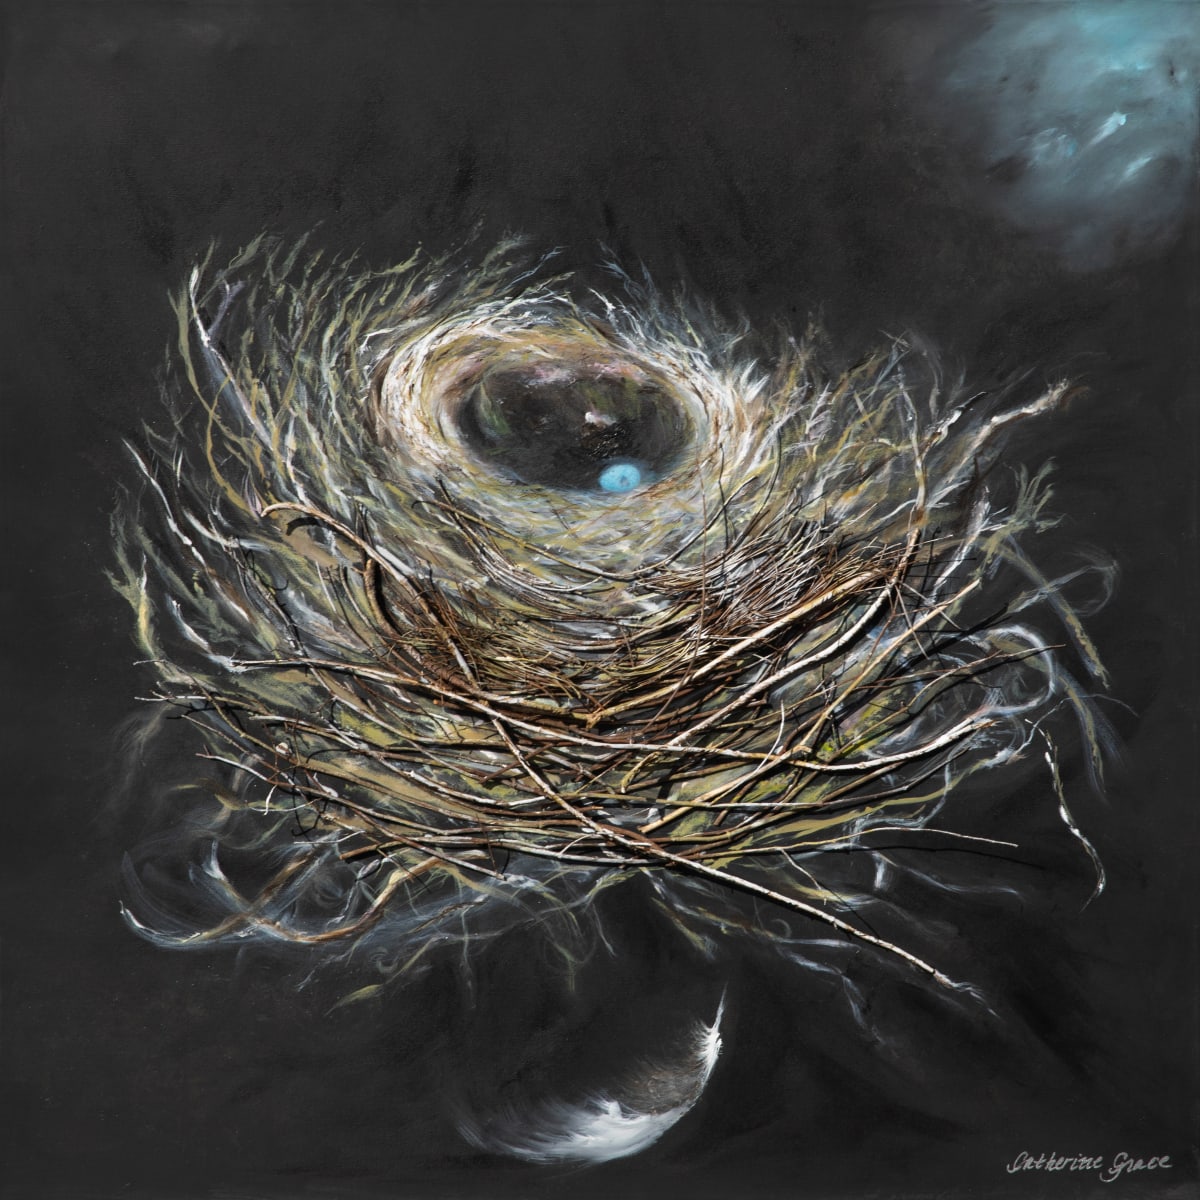 ‘Nest’ by Catherine Grace  Image:  'Nest’🪺 🕊️ - A delicate masterpiece crafted from nature's own twigs and pine needles, with intricately hand-painted strokes in rich acrylic, cradling the promise of new life within its embrace. 🎨 #ArtistryInNature #SymbolsOfLife  #NestArt